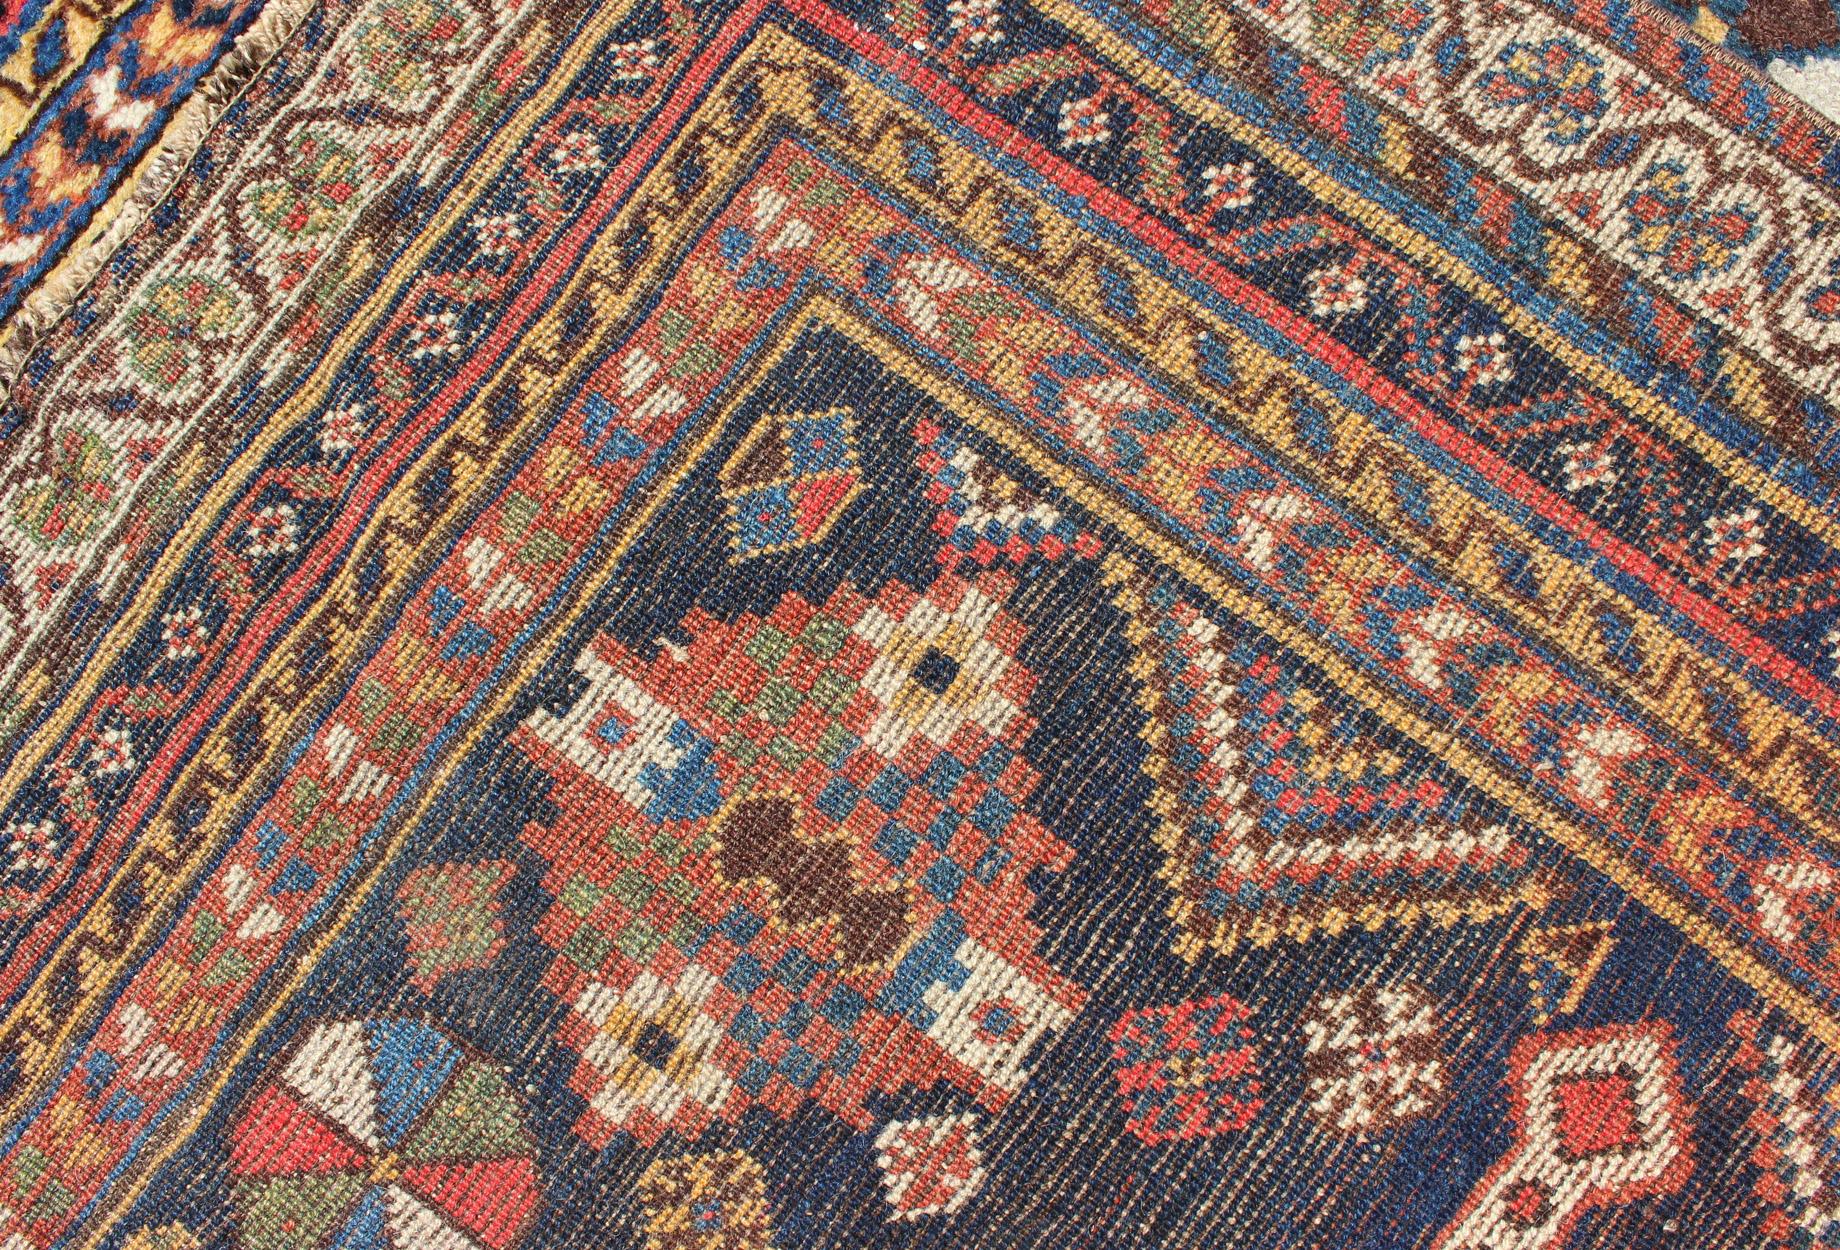 Antique Persian Qashqai Rug with Four-Medallion Design in Blue, Red, Brown Tones For Sale 4